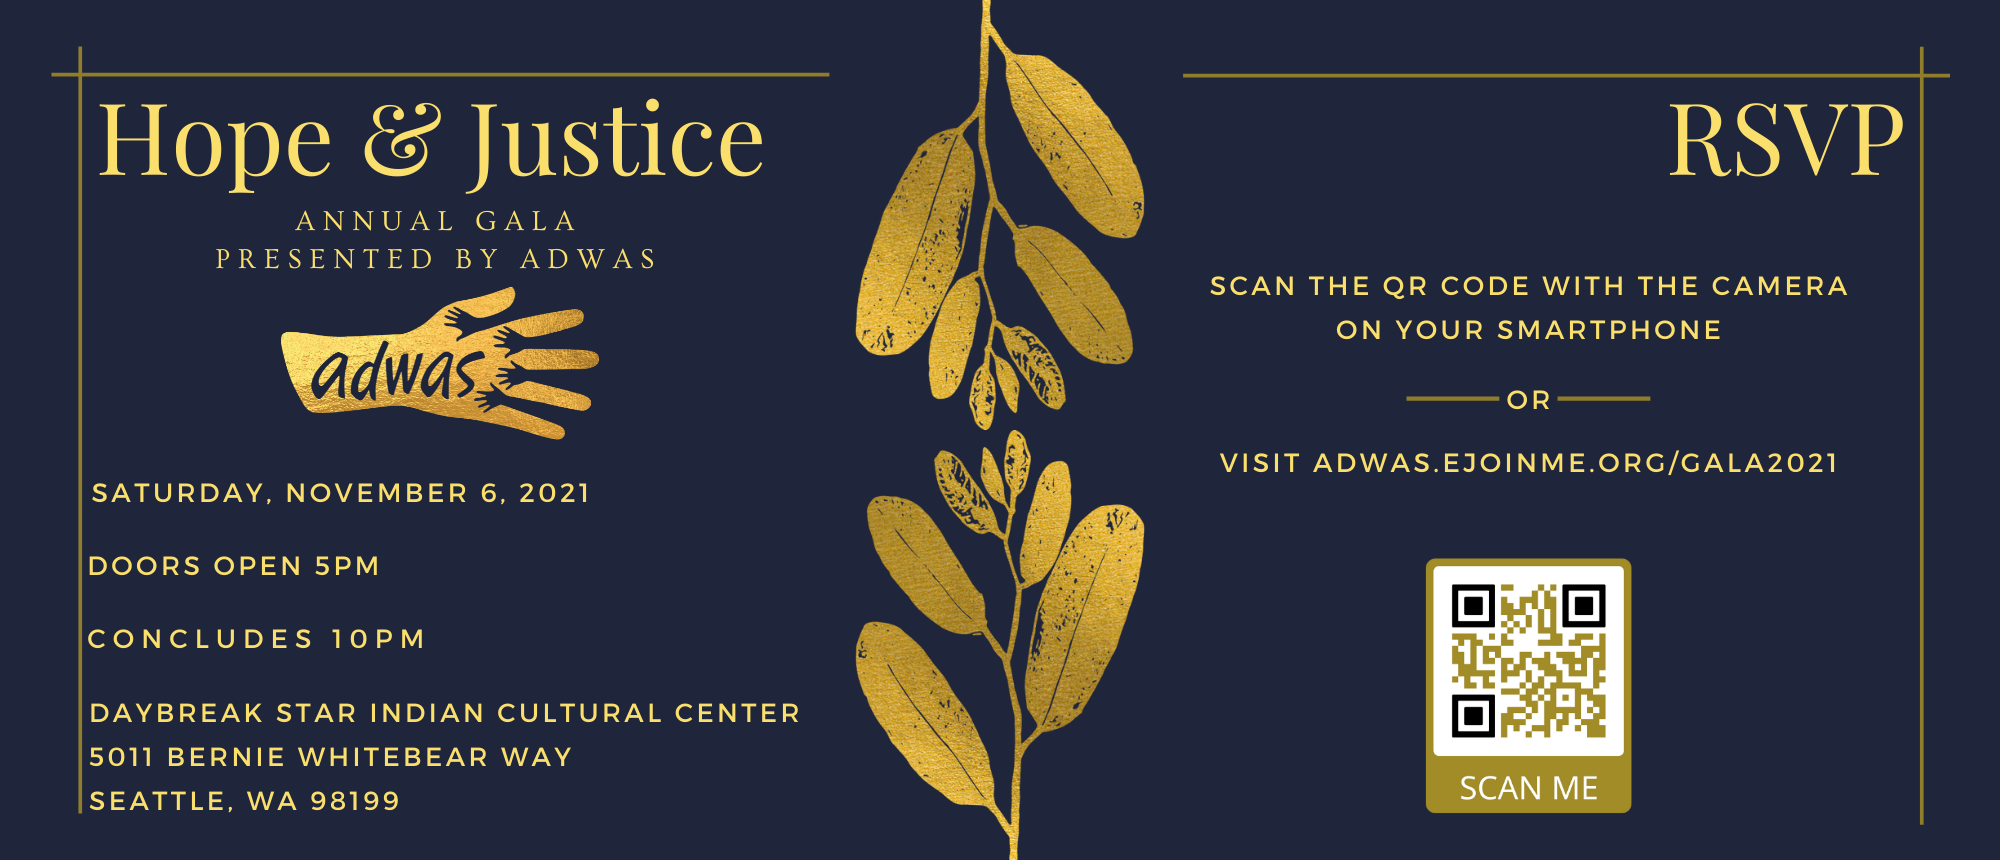 A dark blue background with gold leaves dividing the center. On the left in golden text "Hope & Justice / Annual Gala / Presented by ADWAS" Underneath this is ADWAS' logo in golden colors. Underneath the logo "Saturday, November 6, 2021 / Doors open 5pm / Concludes 10pm / Daybreak Star Indian Cultural Center / 5011 Bernie Whitebear Way / Seattle, WA 98199". On the right in golden text "RSVP / Scan the QR Code with the camera on your smartphone / or / visit adwas.ejoinme.org/gala2021" Underneath this is a golden QR code with the words "Scan Me"